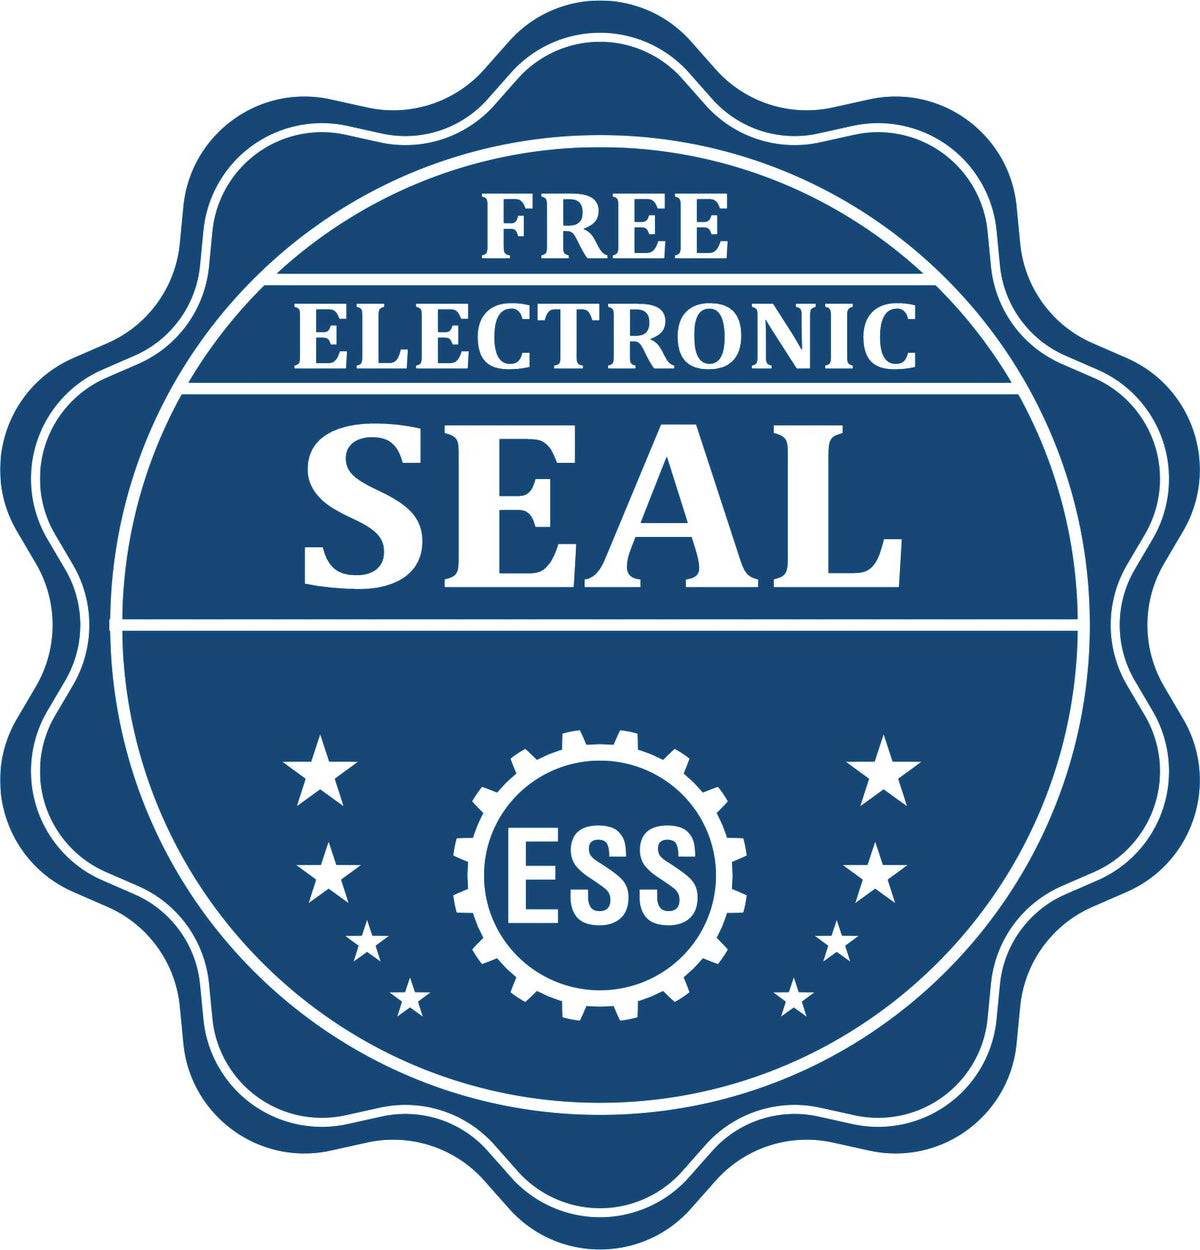 A badge showing a free electronic seal for the Premium MaxLight Pre-Inked New Hampshire Landscape Architectural Stamp with stars and the ESS gear on the emblem.